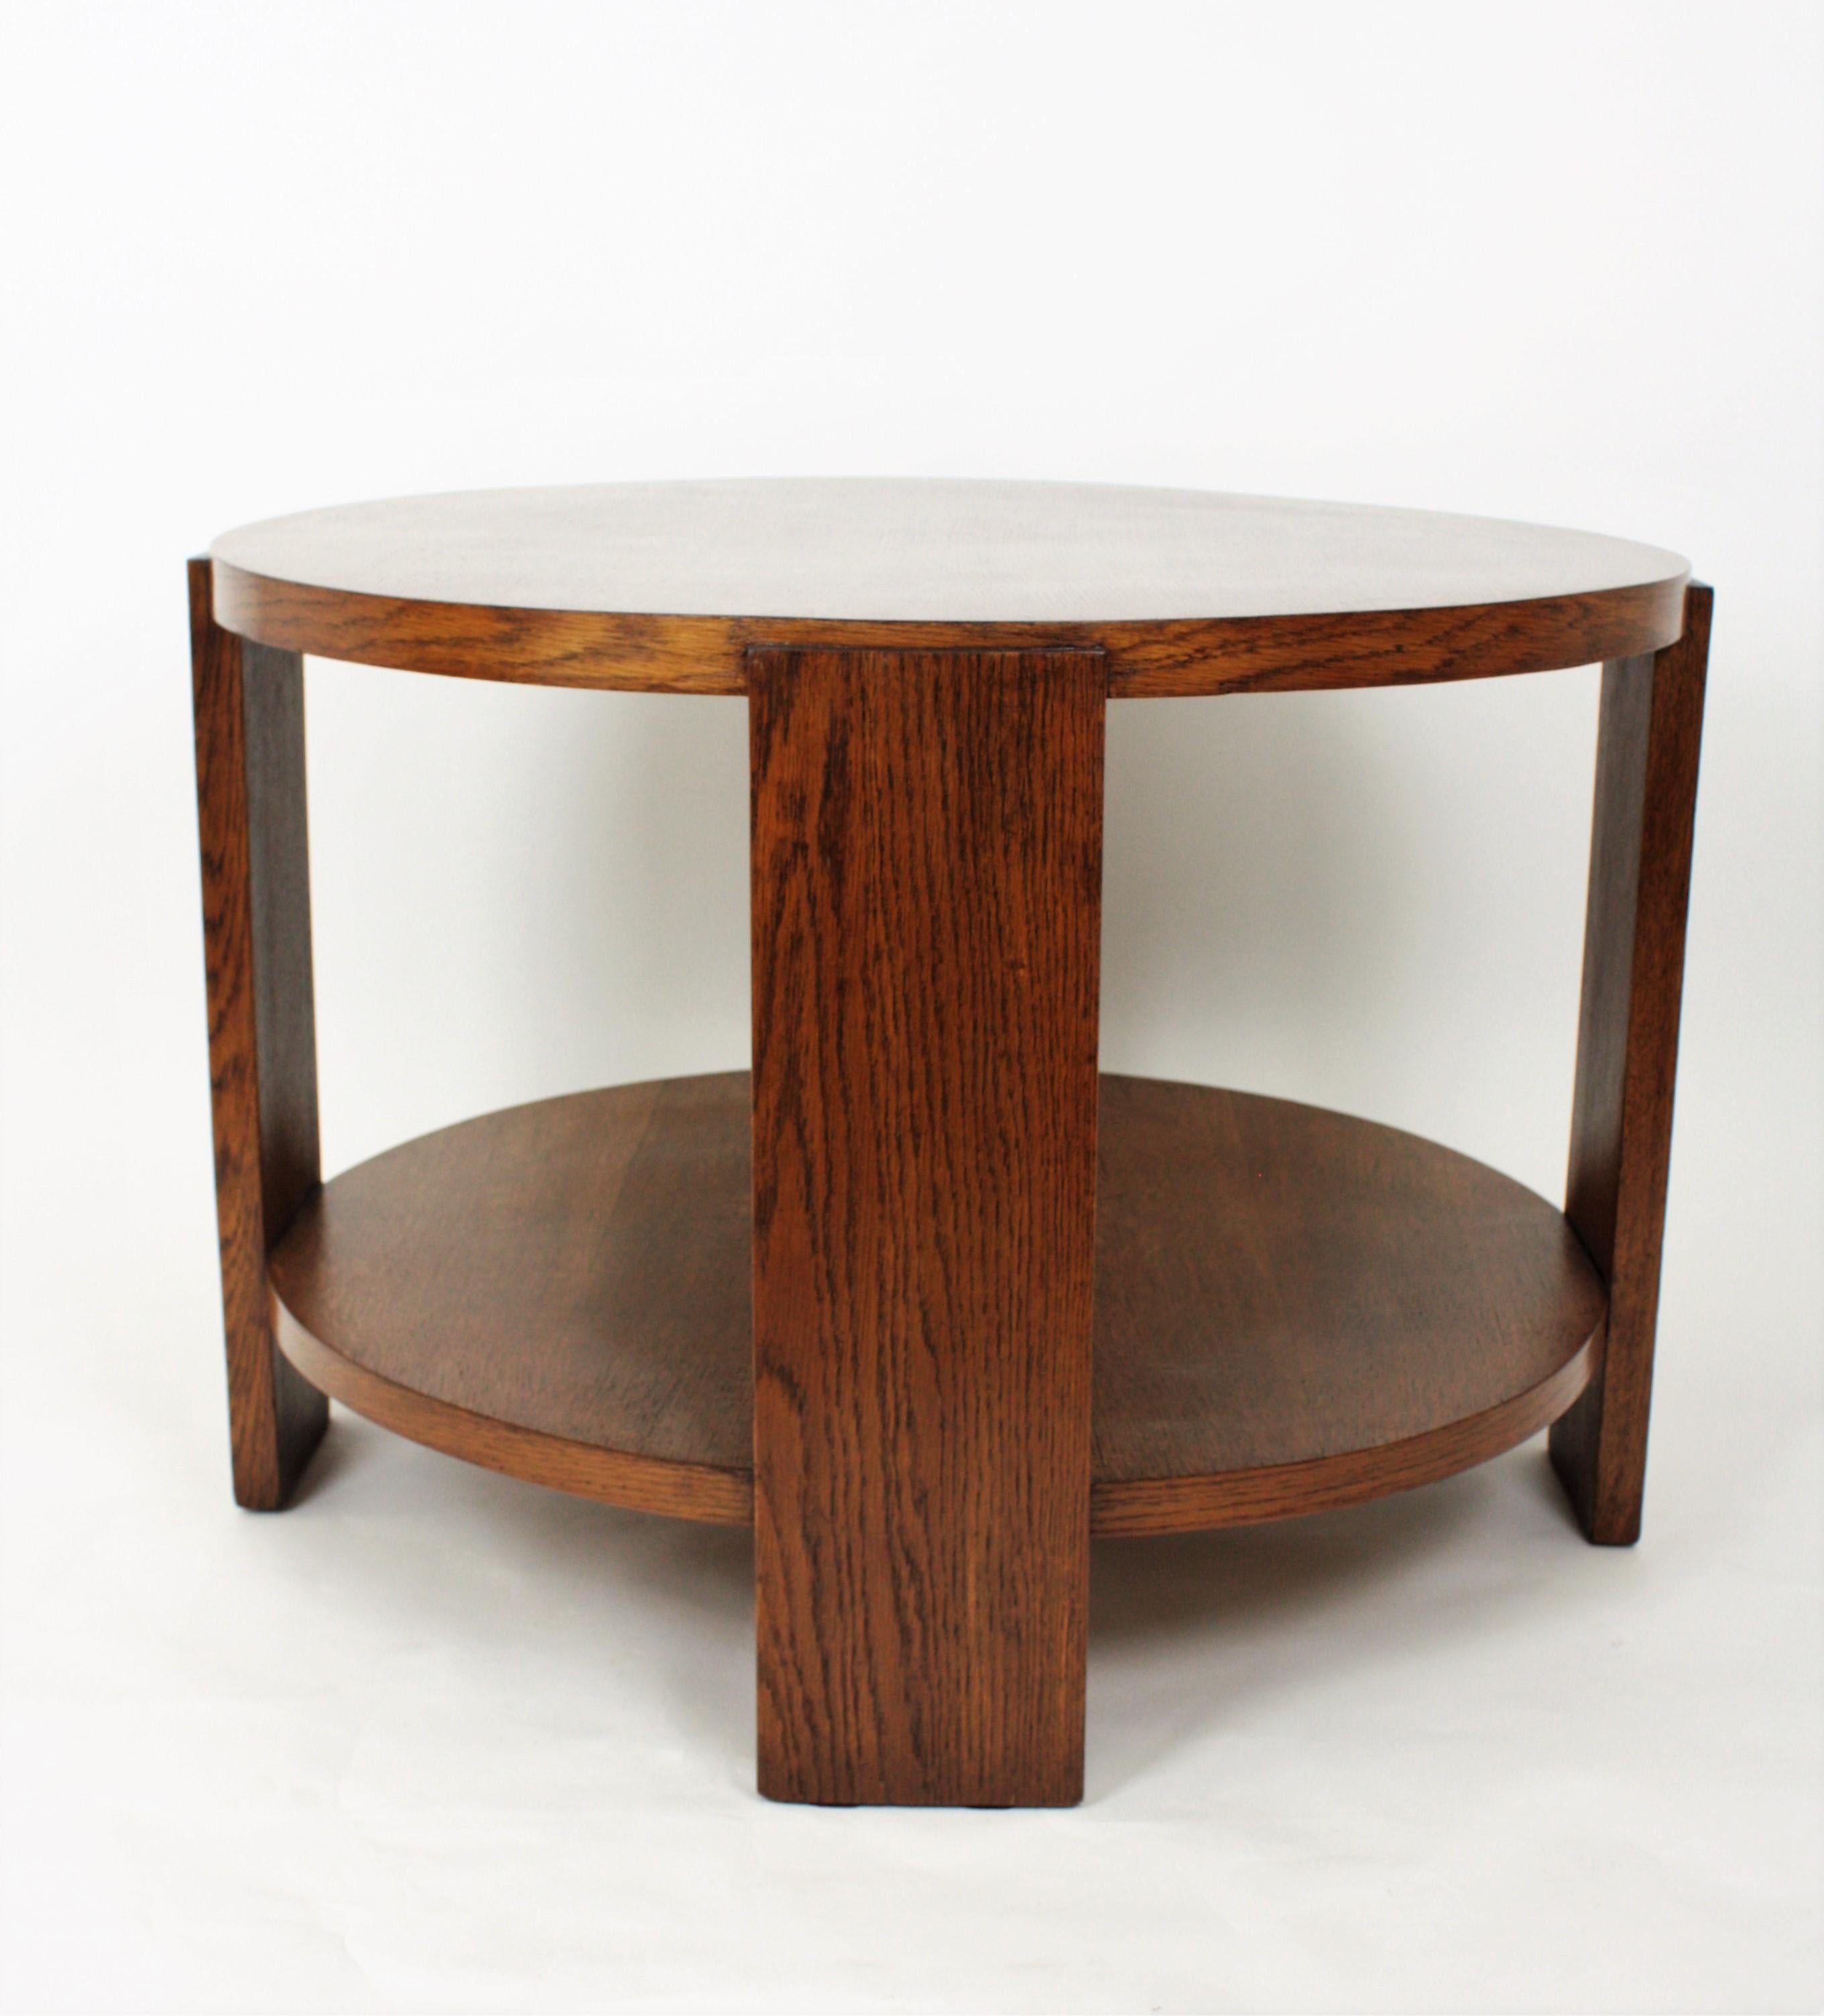 Stylish oak wood Art Deco table with two levels and a beautiful design with a shelf and supported by four round top side supports.
This table has been carefully restored and varnished using traditional methods. Lovely to be used as coffee table,